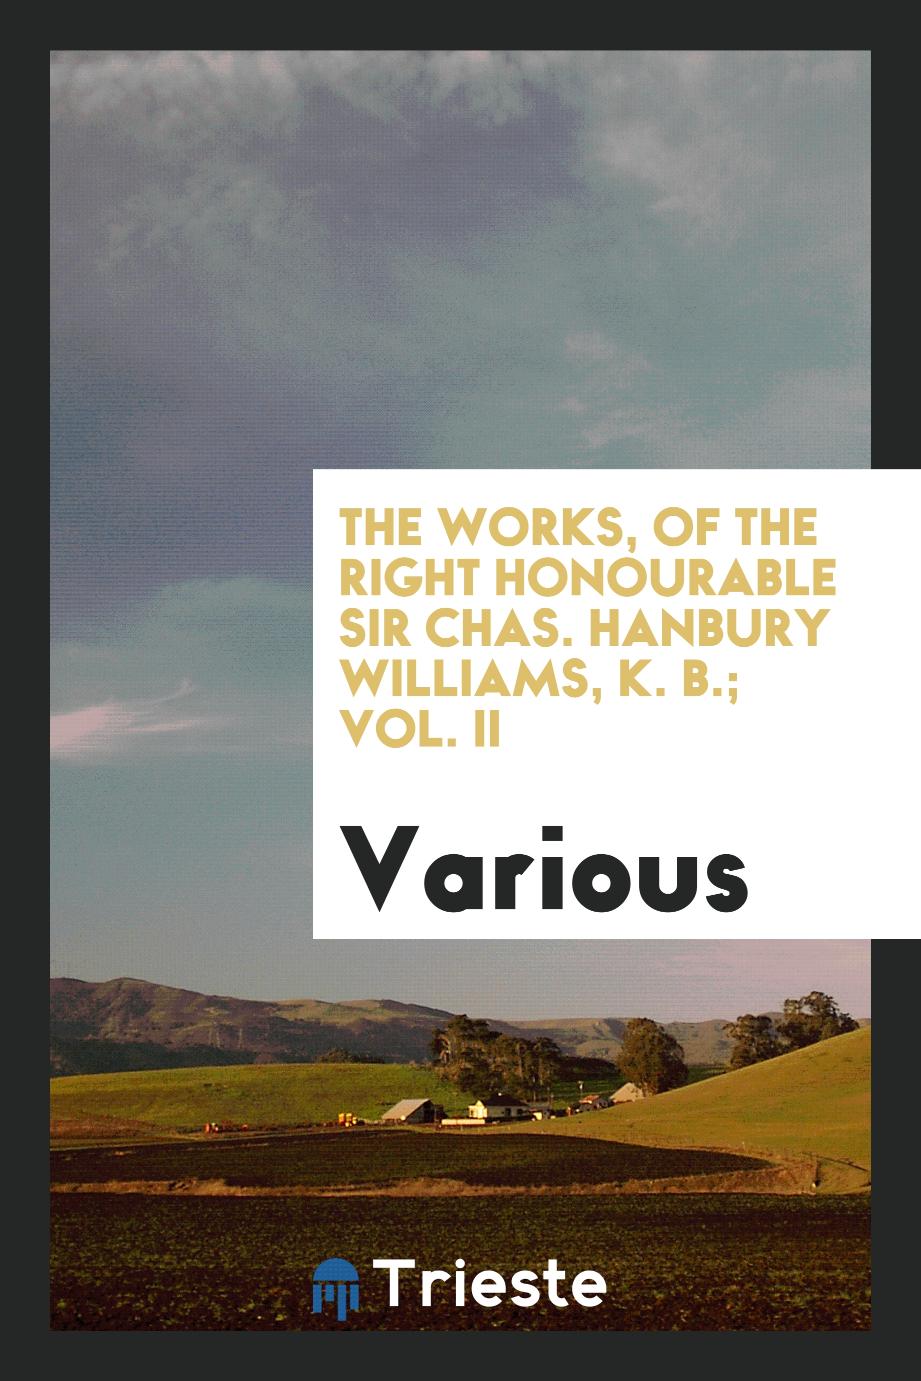 The works, of the Right Honourable Sir Chas. Hanbury Williams, K. B.; Vol. II